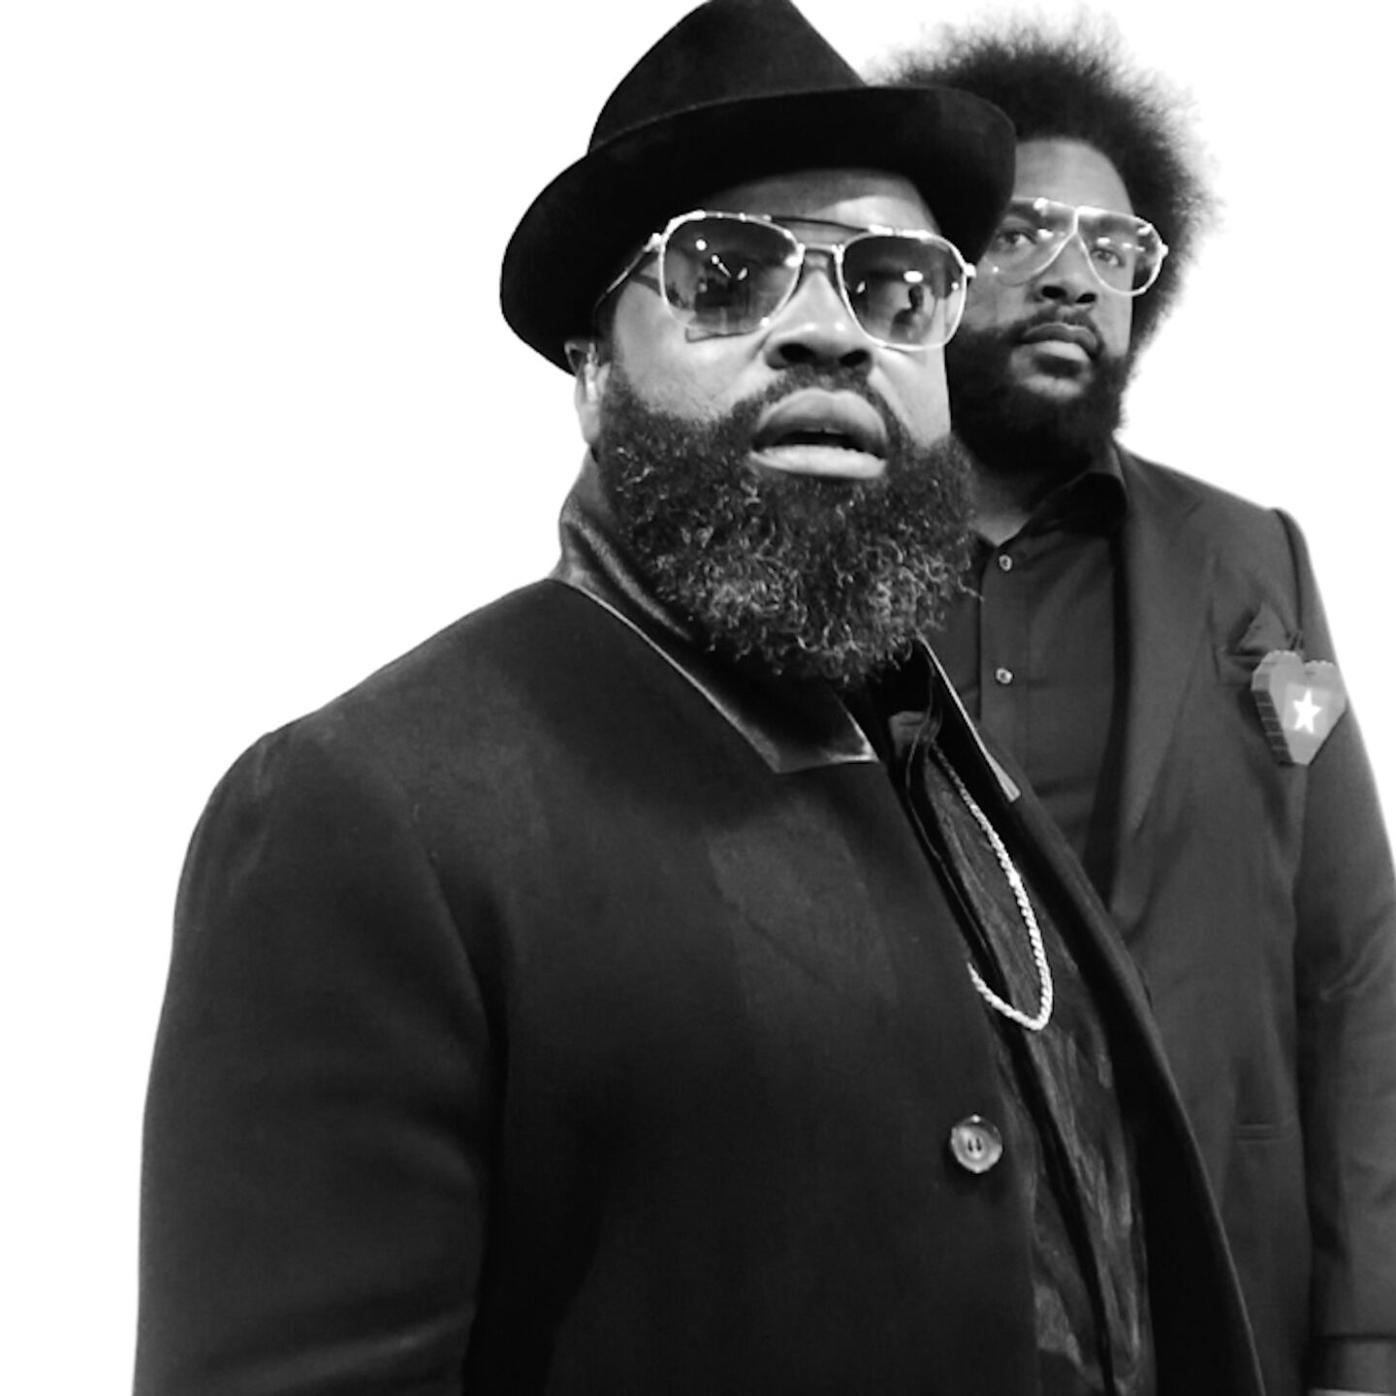 black thought x black thought - the roots